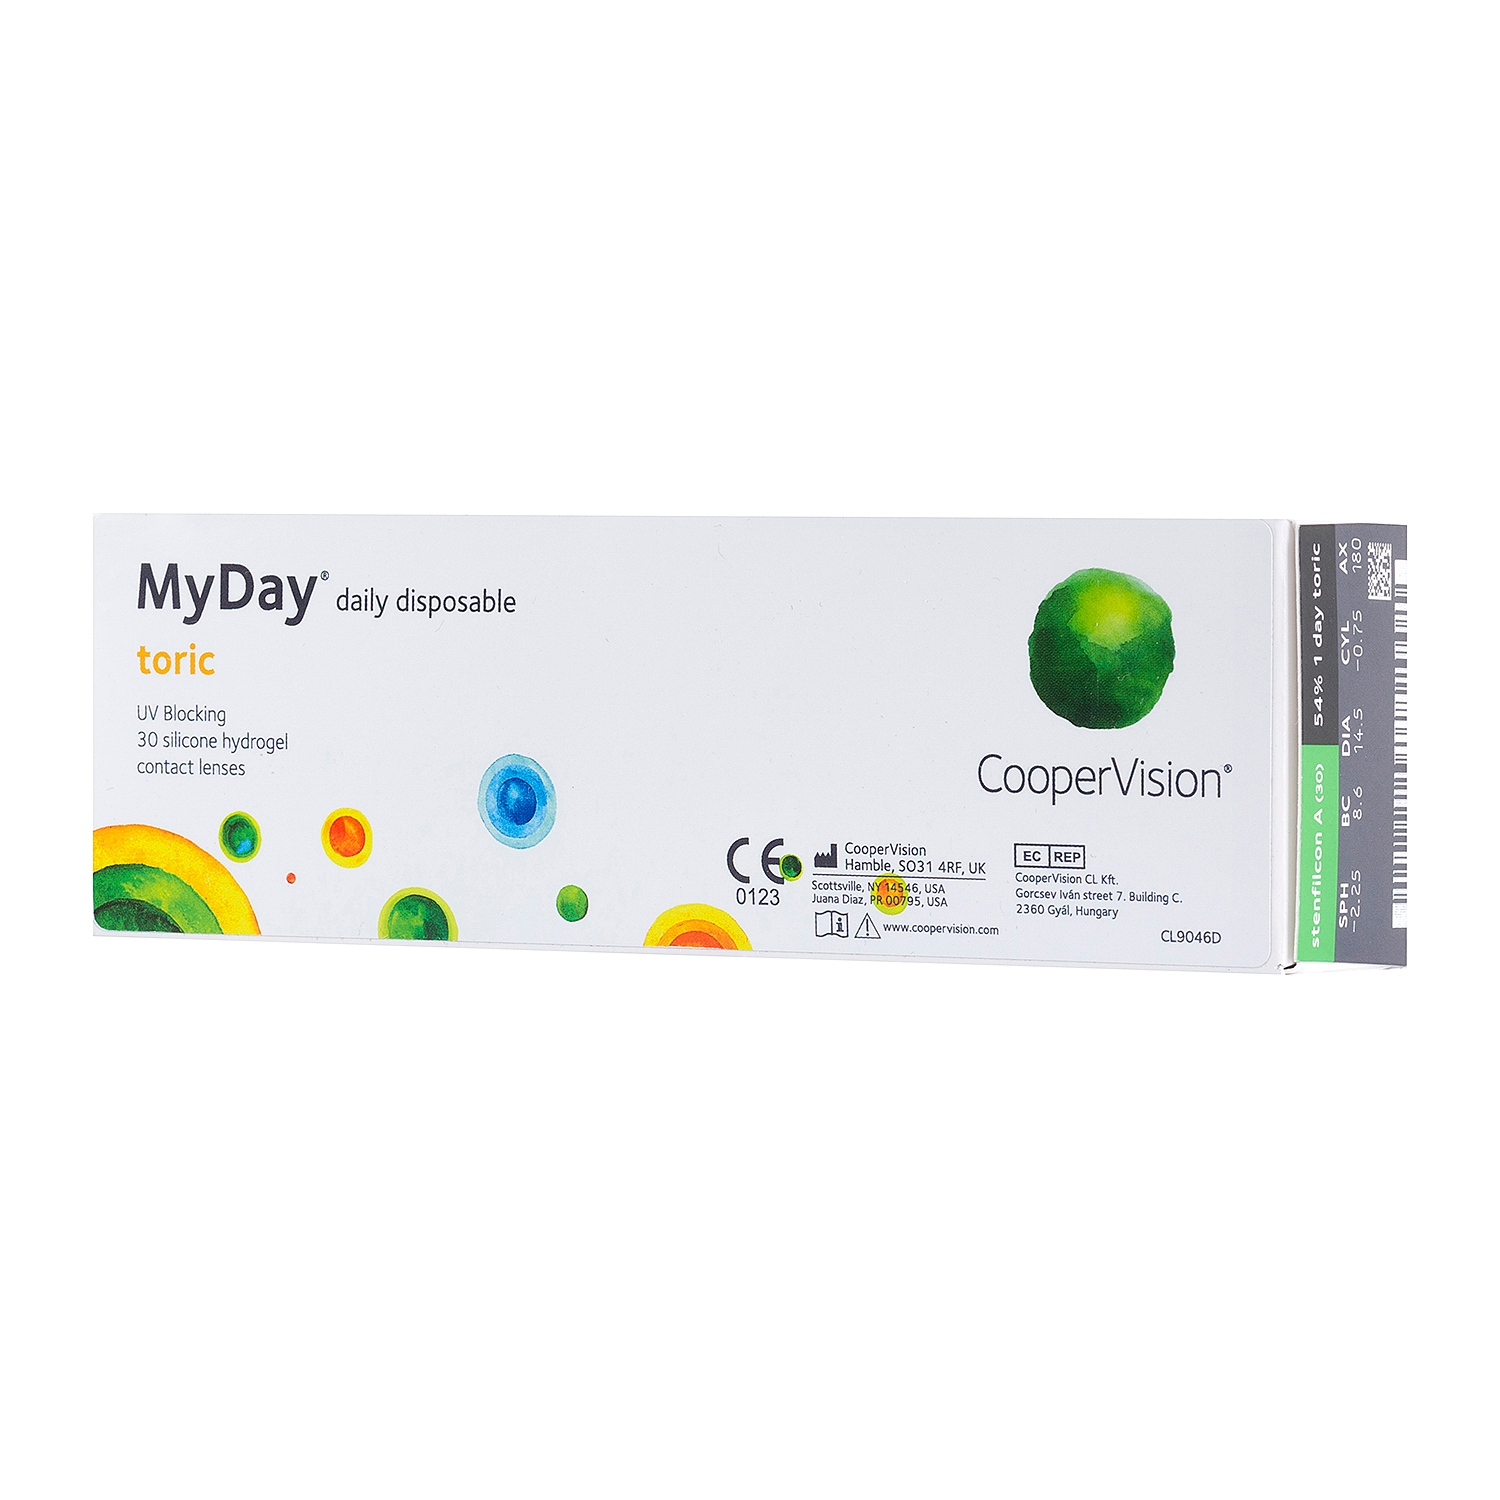 MyDay Daily Disposable Toric 30